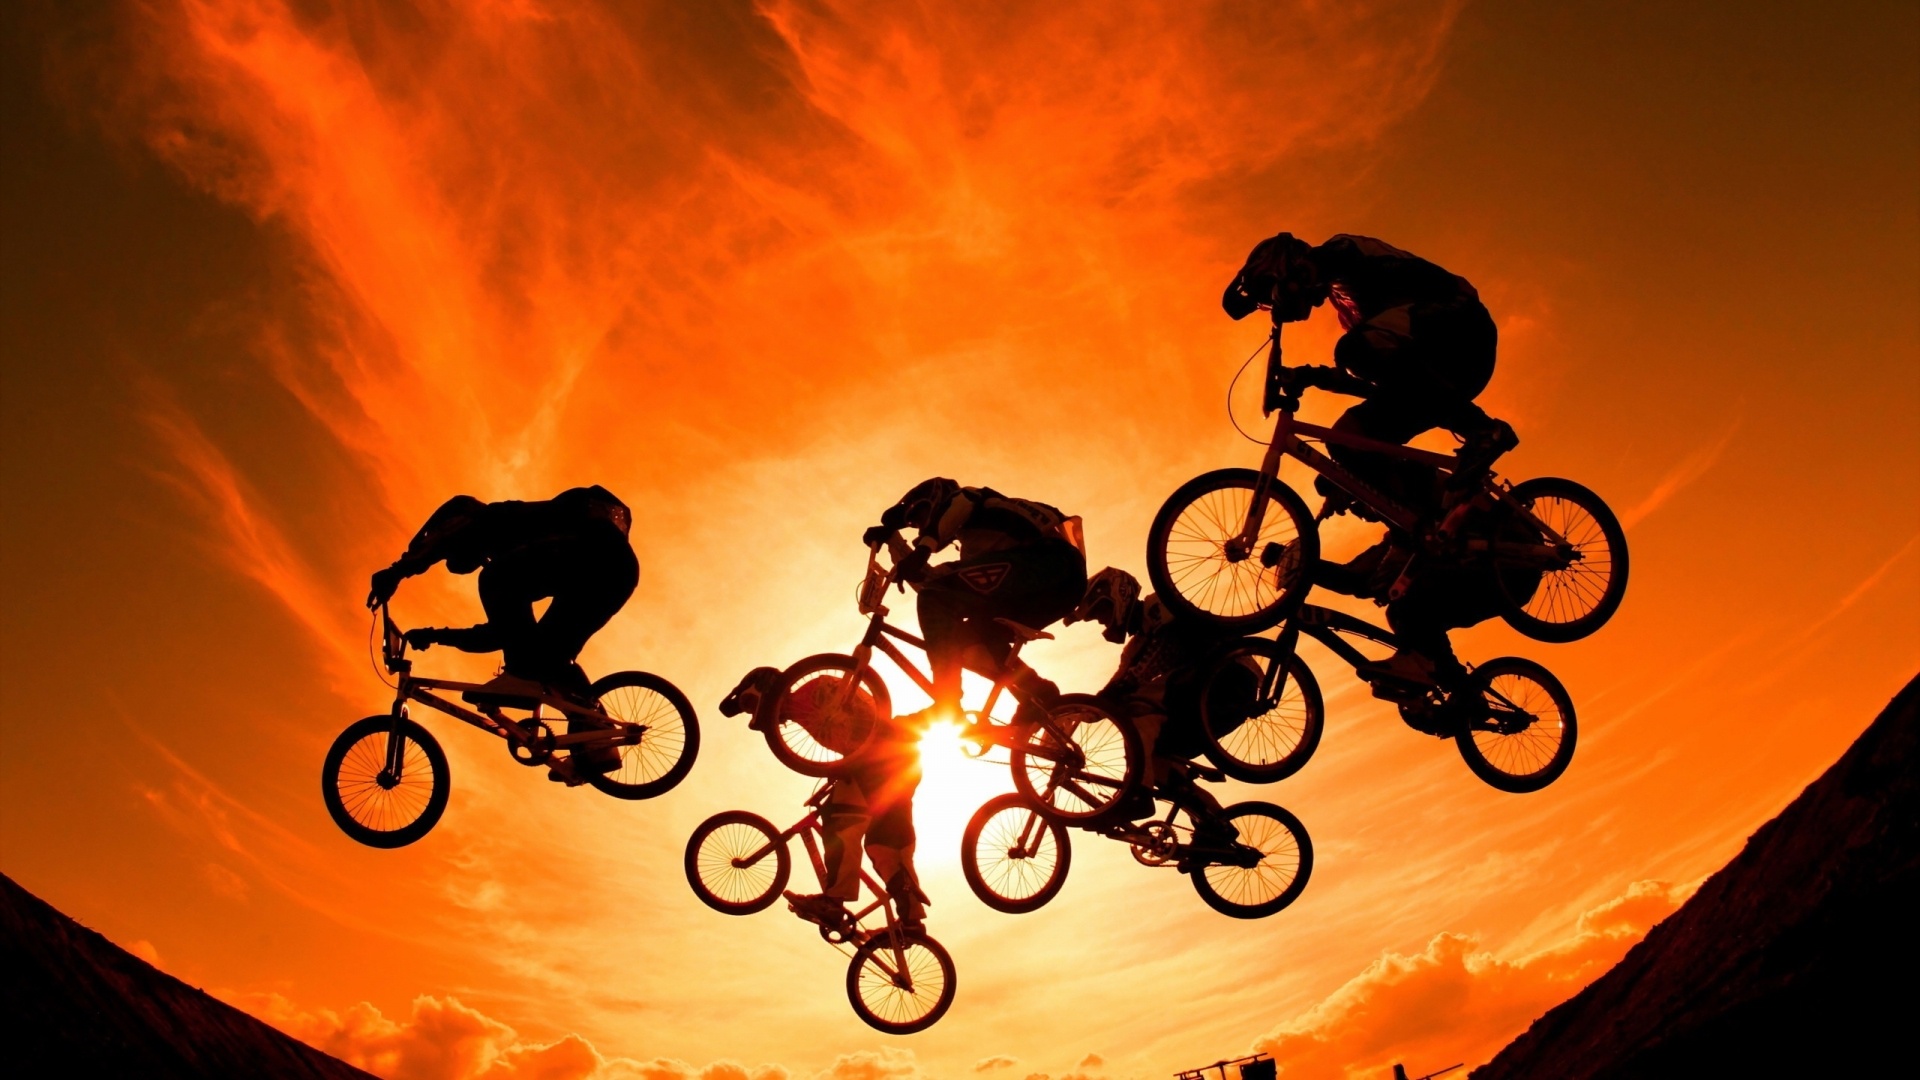 BMX (Sports): Men’s and Women’s Amateur And Pro Jump Competition, 2022. 1920x1080 Full HD Wallpaper.